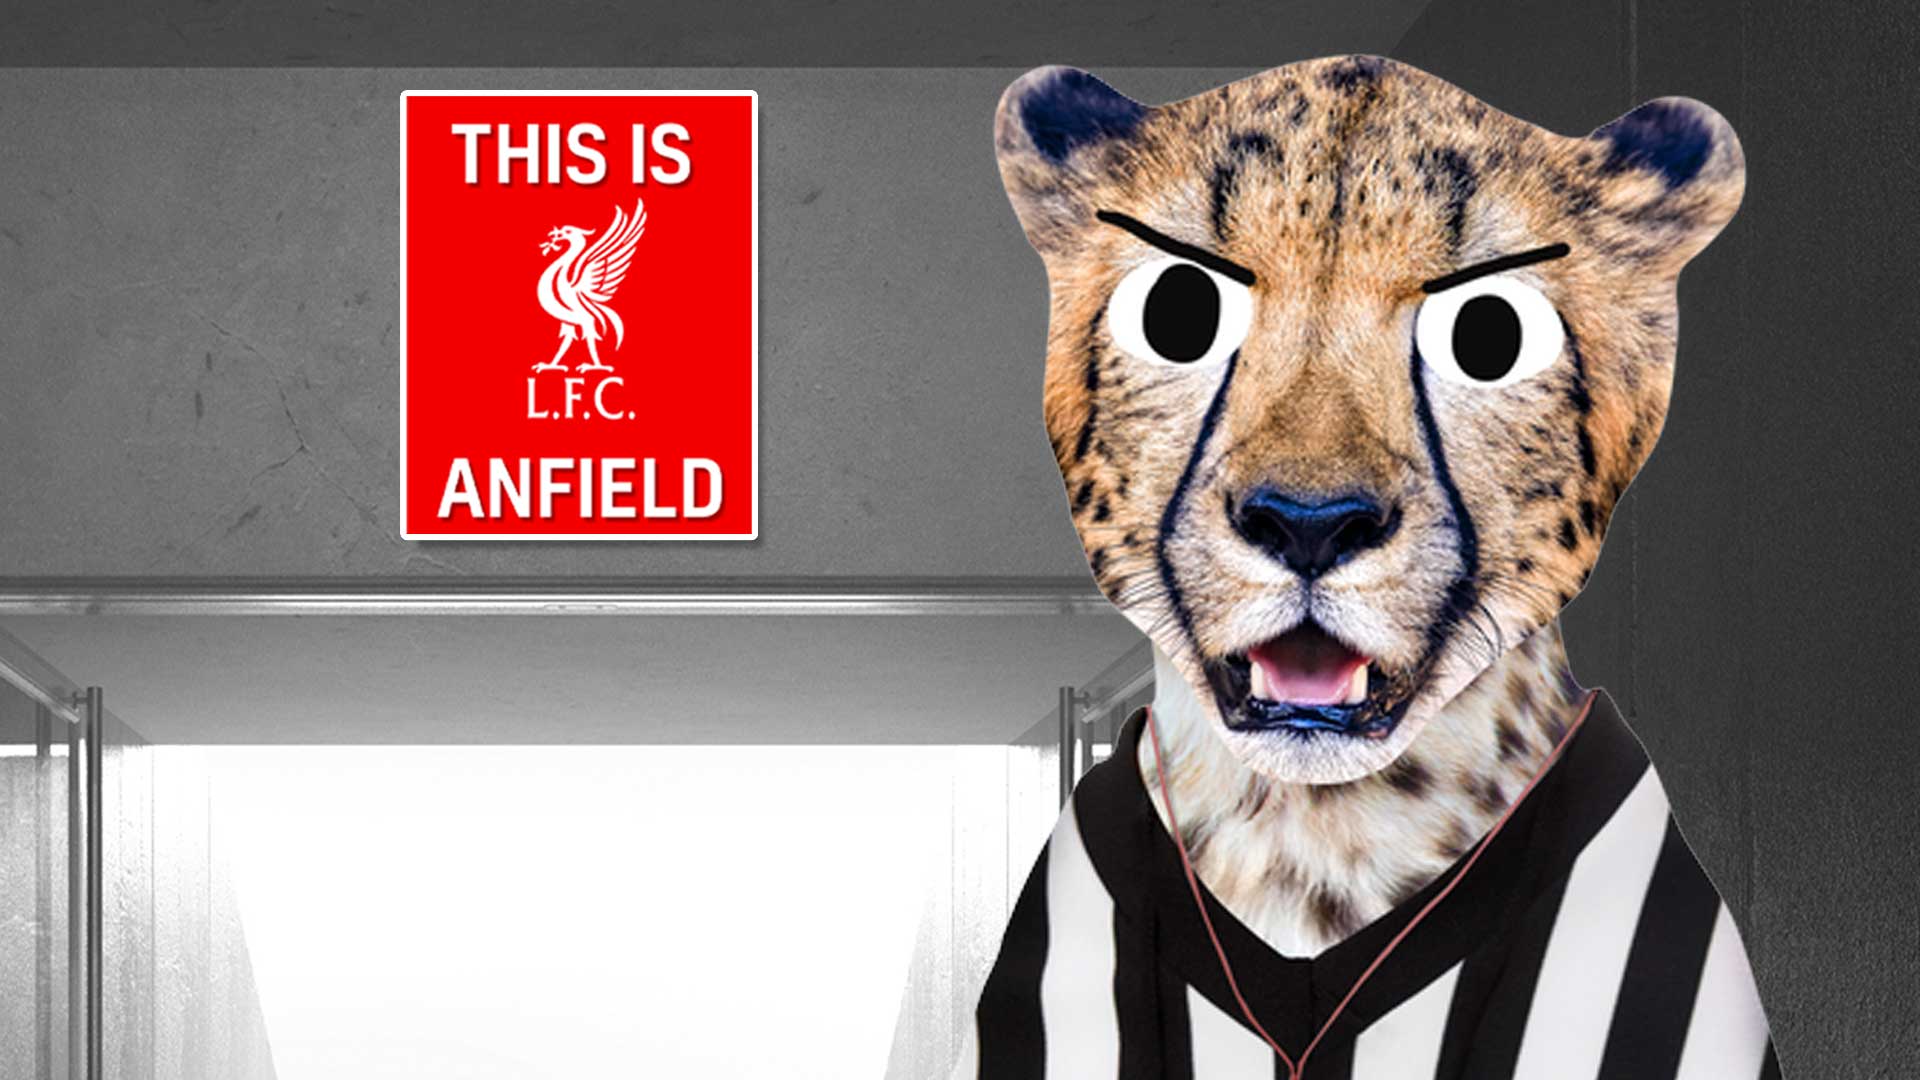 A cheetah next to the This is Anfield sign